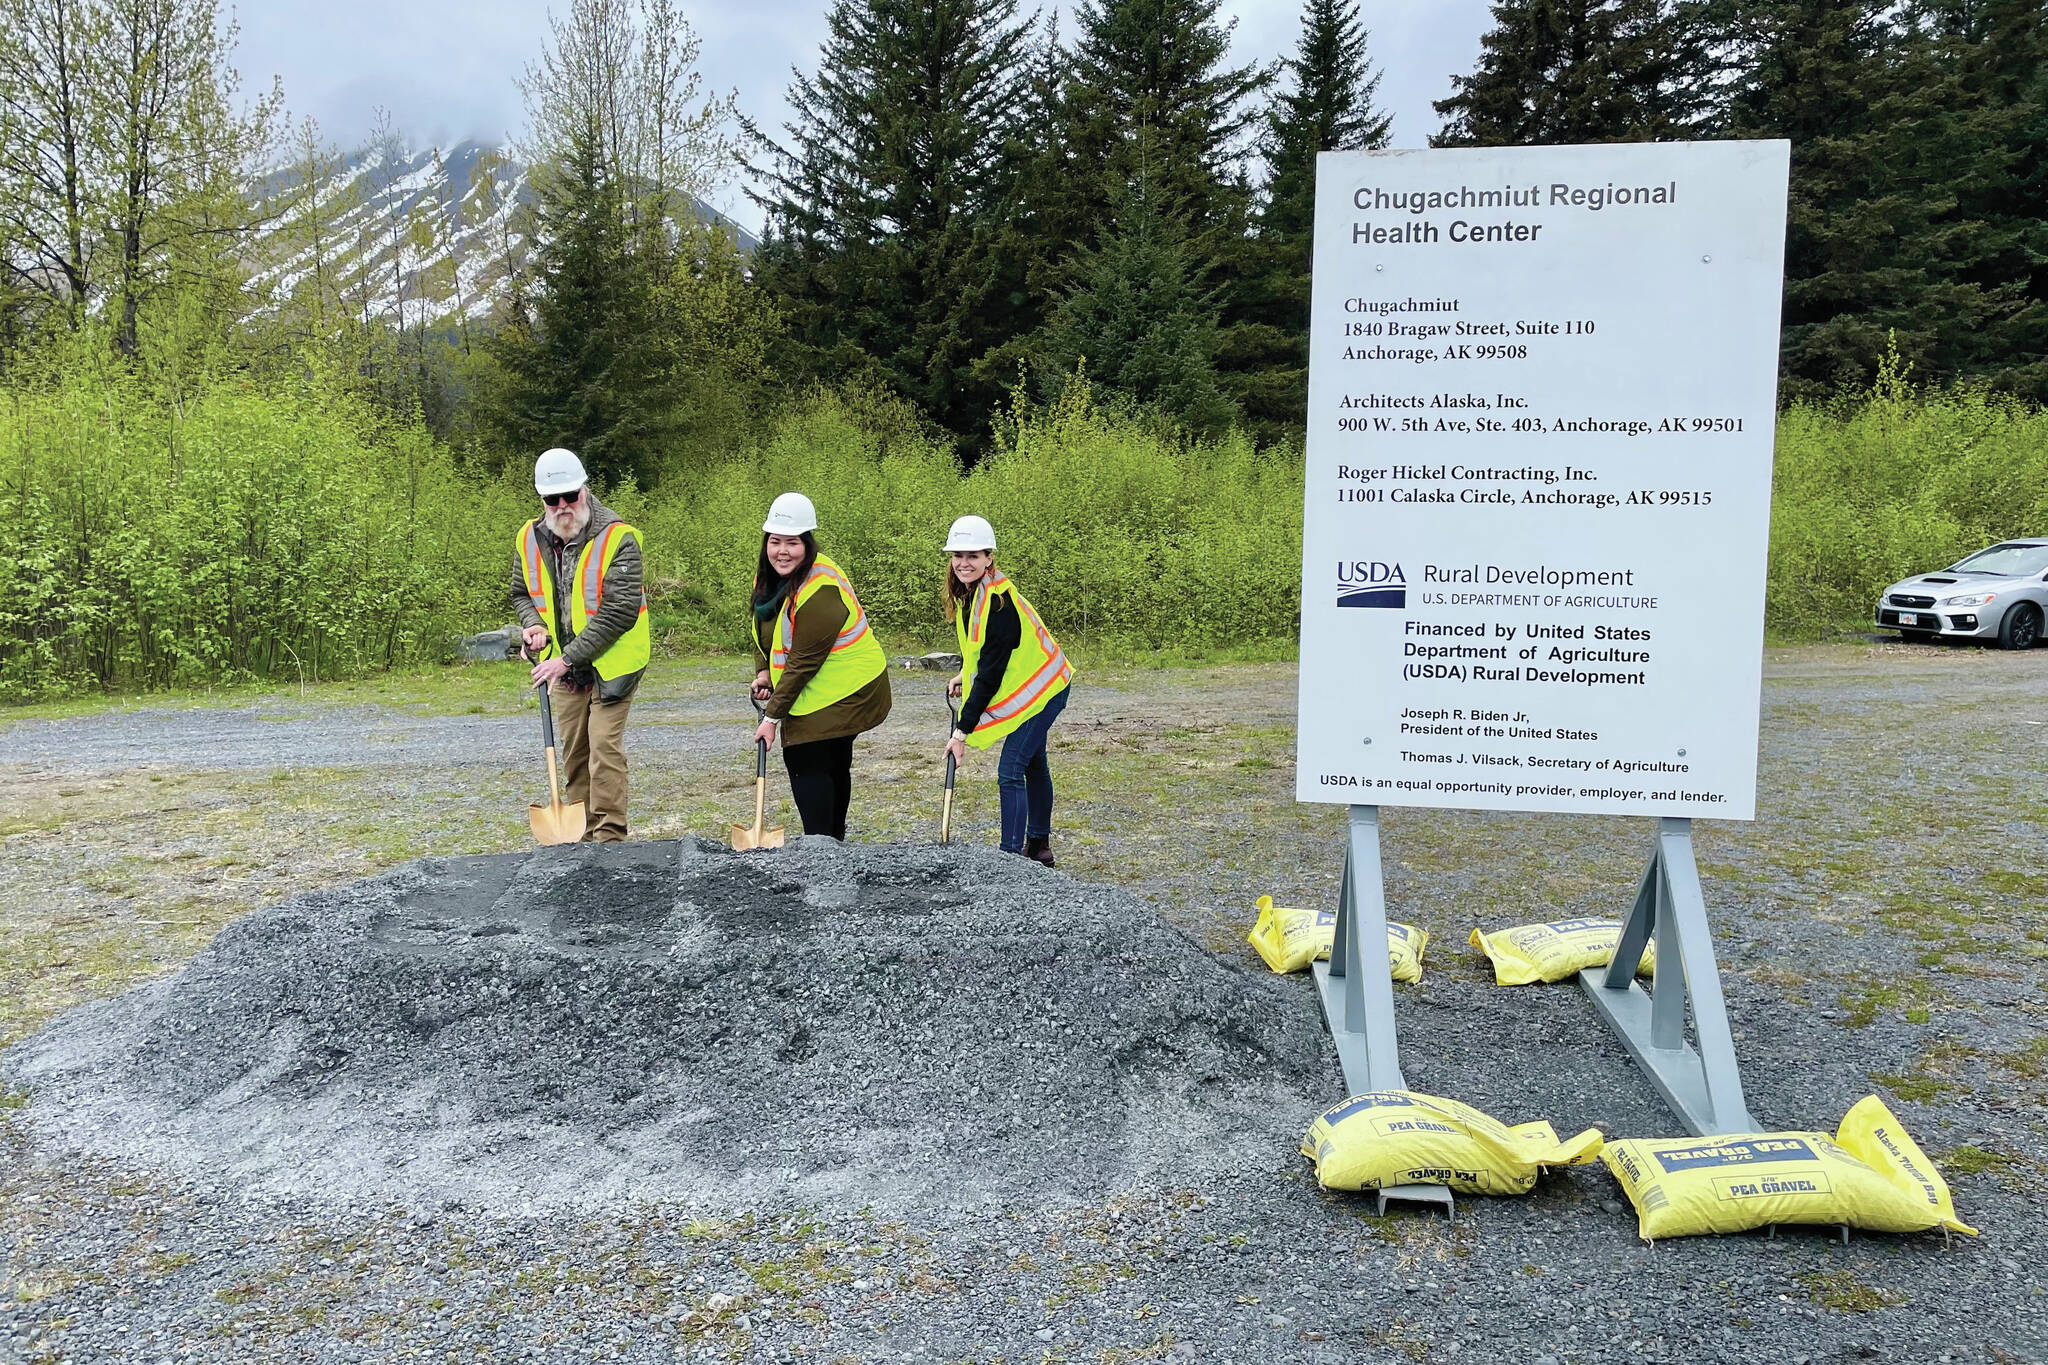 Photo provided by United States Department of Agriculture Rural Development
Chugachmiut Board Vice Chair Larry Evanoff from Chenega, Chair Fran Norman from Port Graham, and Director Arne Hatch from Qutekcak break ground for the Chugachmiut Regional Health Center in Seward, June 3. The occasion marked the start of construction of the $20 million facility. The 15,475-square-foot tribally owned and operated health clinic will serve as a regional hub providing medical, dental and behavioral health services for Alaskans in seven tribal communities.